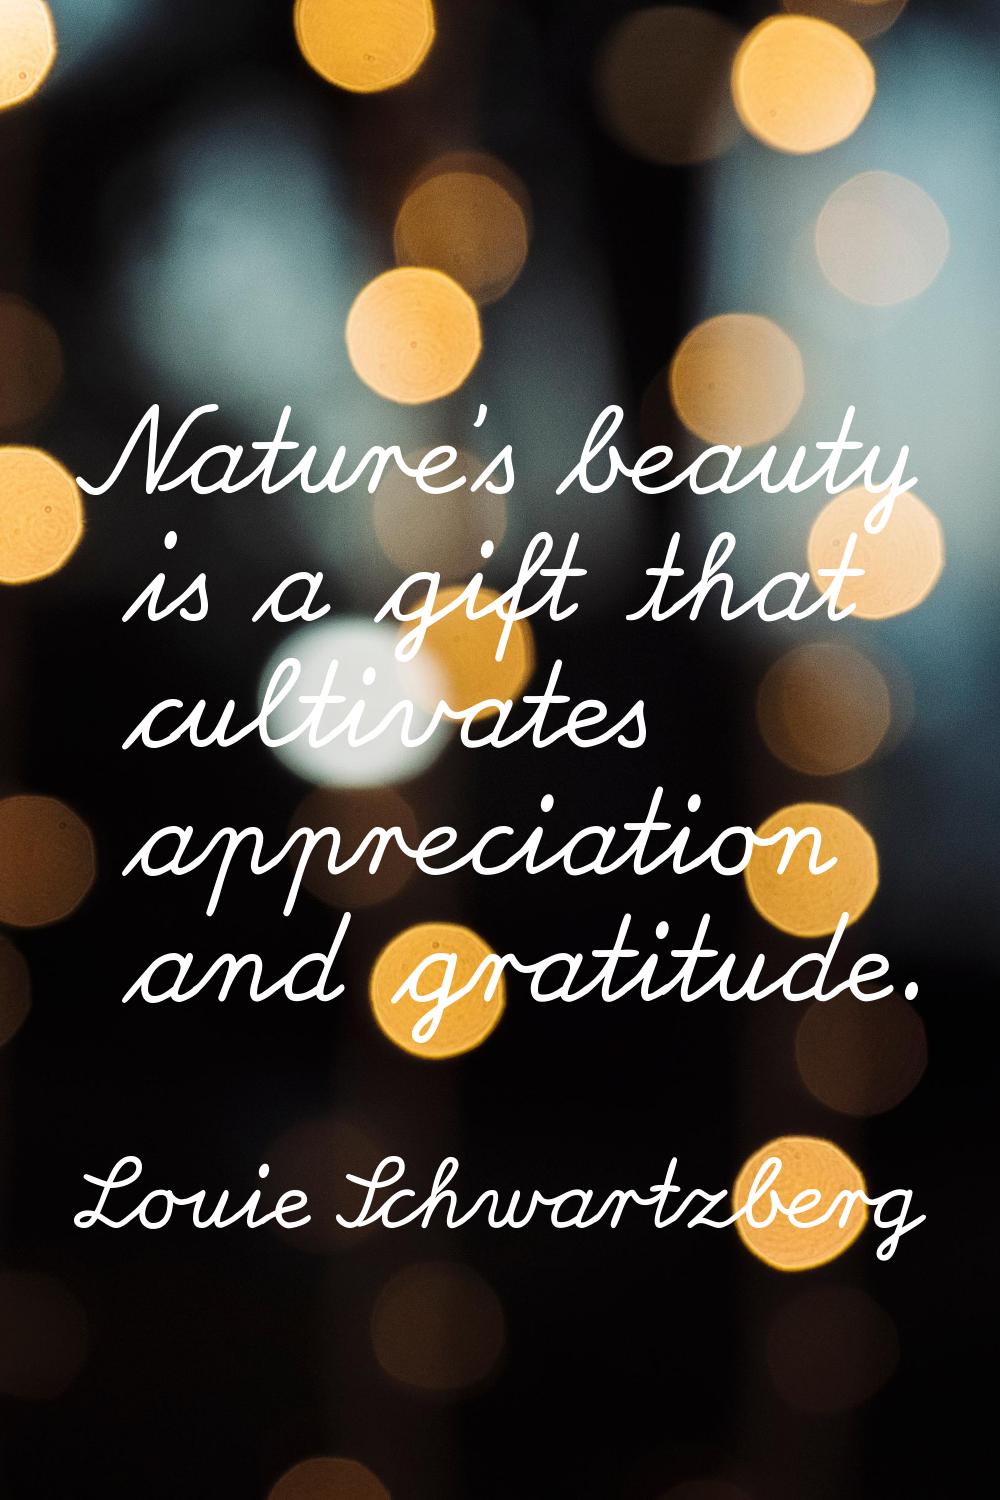 Nature's beauty is a gift that cultivates appreciation and gratitude.